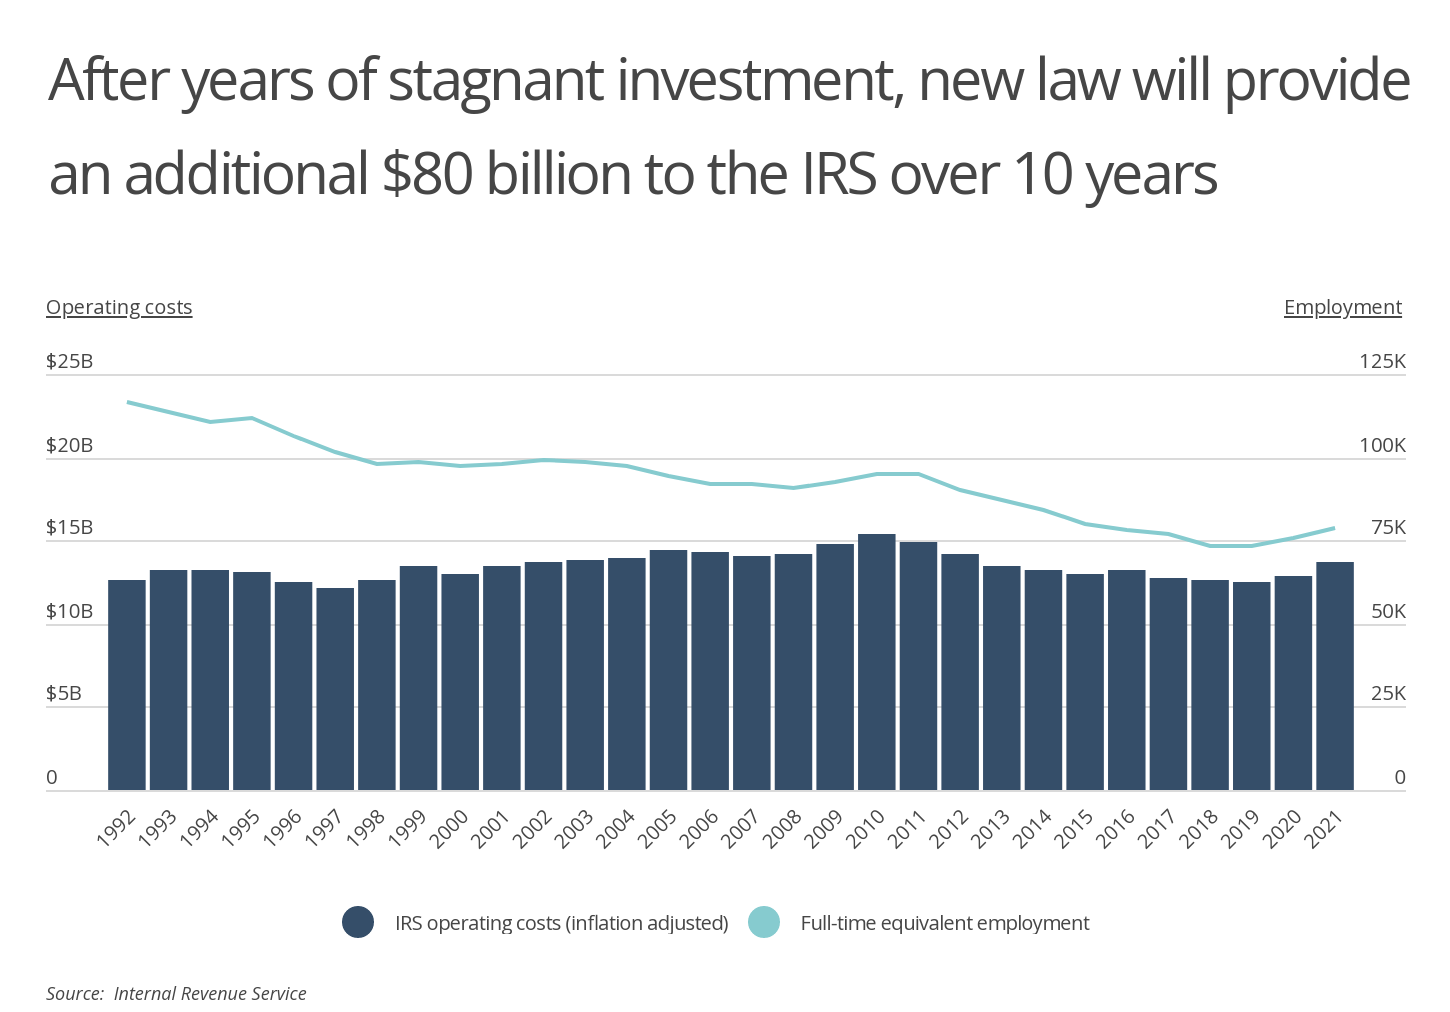 Chart1_New law will provide an additional $80B to the IRS over 10 years